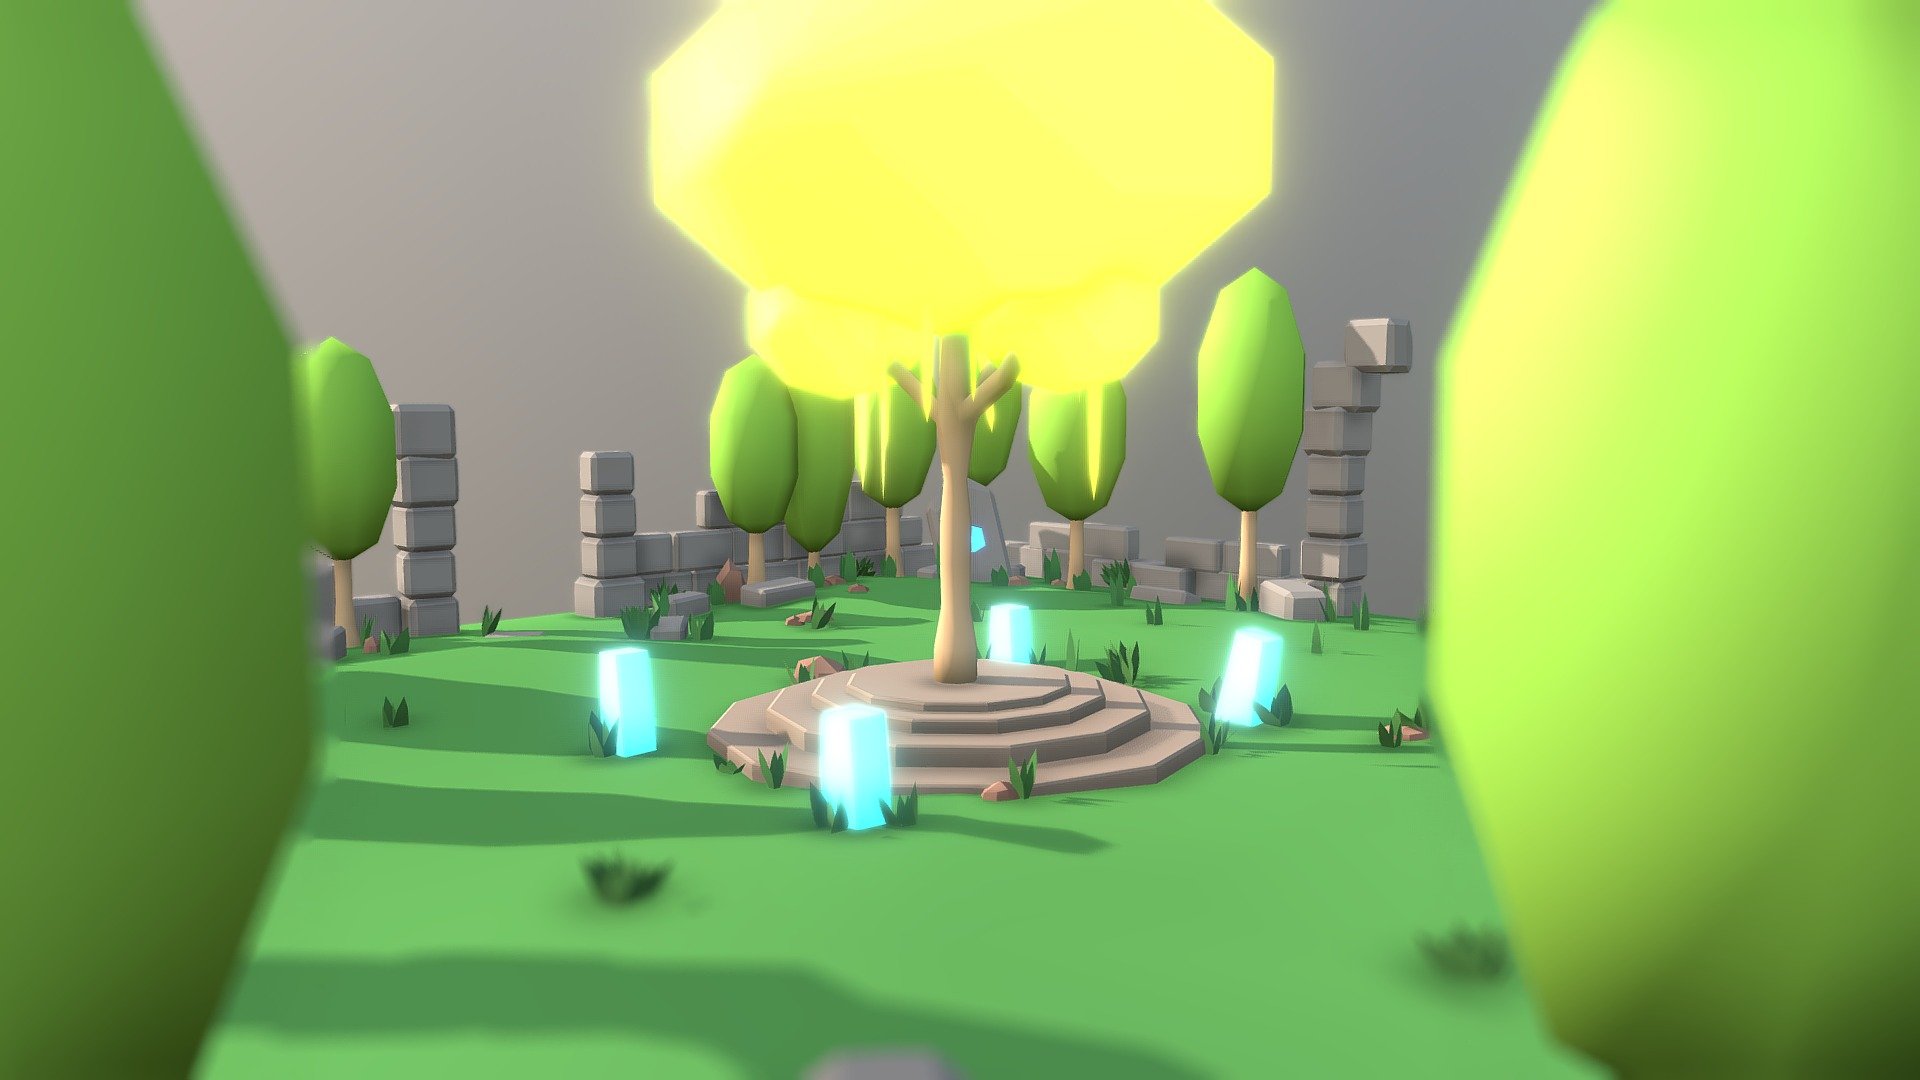 Ancient Garden magical tree scene

this is low poly game scene level design, feel free to use in in your games, take obj and mtl file together into Unity or Unreal game engine or any other engines

please follow me and comment your views on my work

follow me :instagram.com/k3dart


Gamedesign #Gamelevel #Gamelowpoly #Gamescene - Ancient Garden Magical Tree Scene - Buy Royalty Free 3D model by Karthik Naidu (@Karthiknaidu97) 3d model